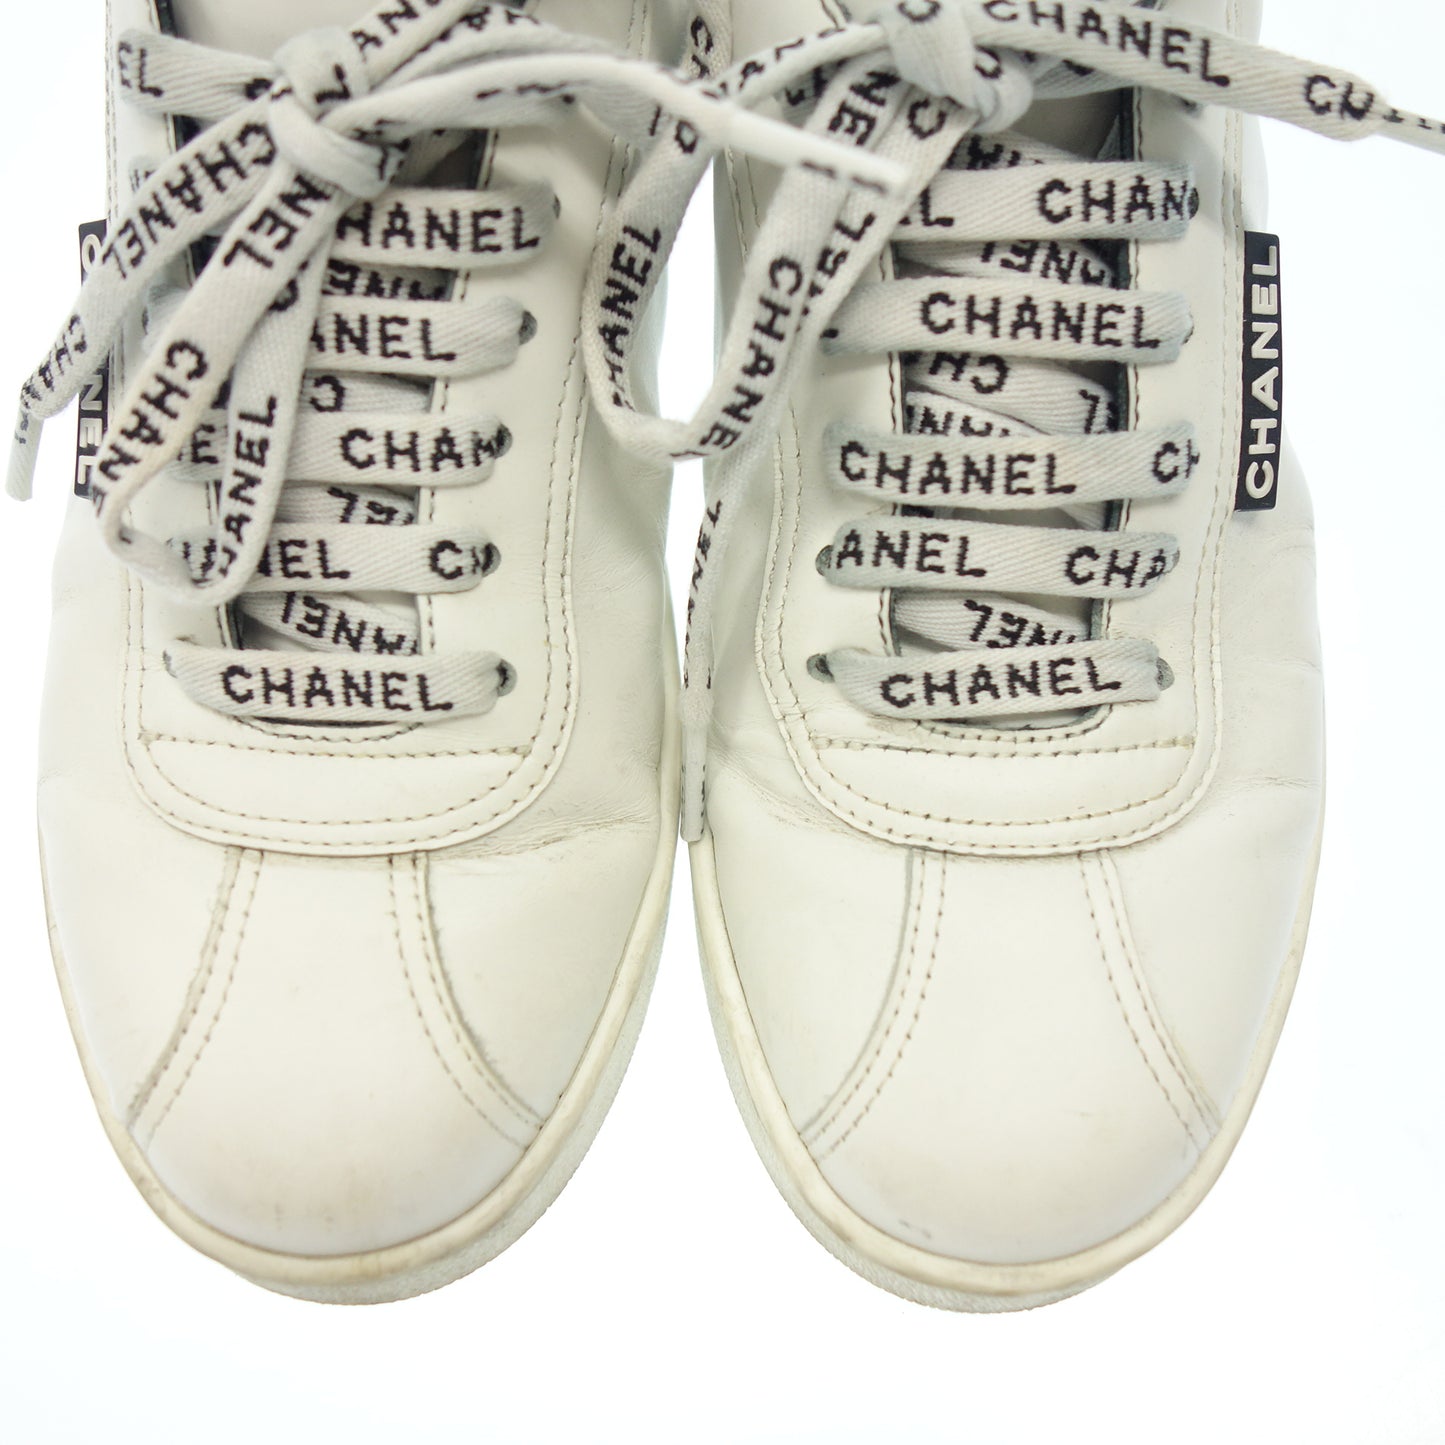 Used ◆CHANEL low cut sneakers here mark heel logo calf leather bicolor ladies white x black size 35 G34085 CHANEL [AFC20] 